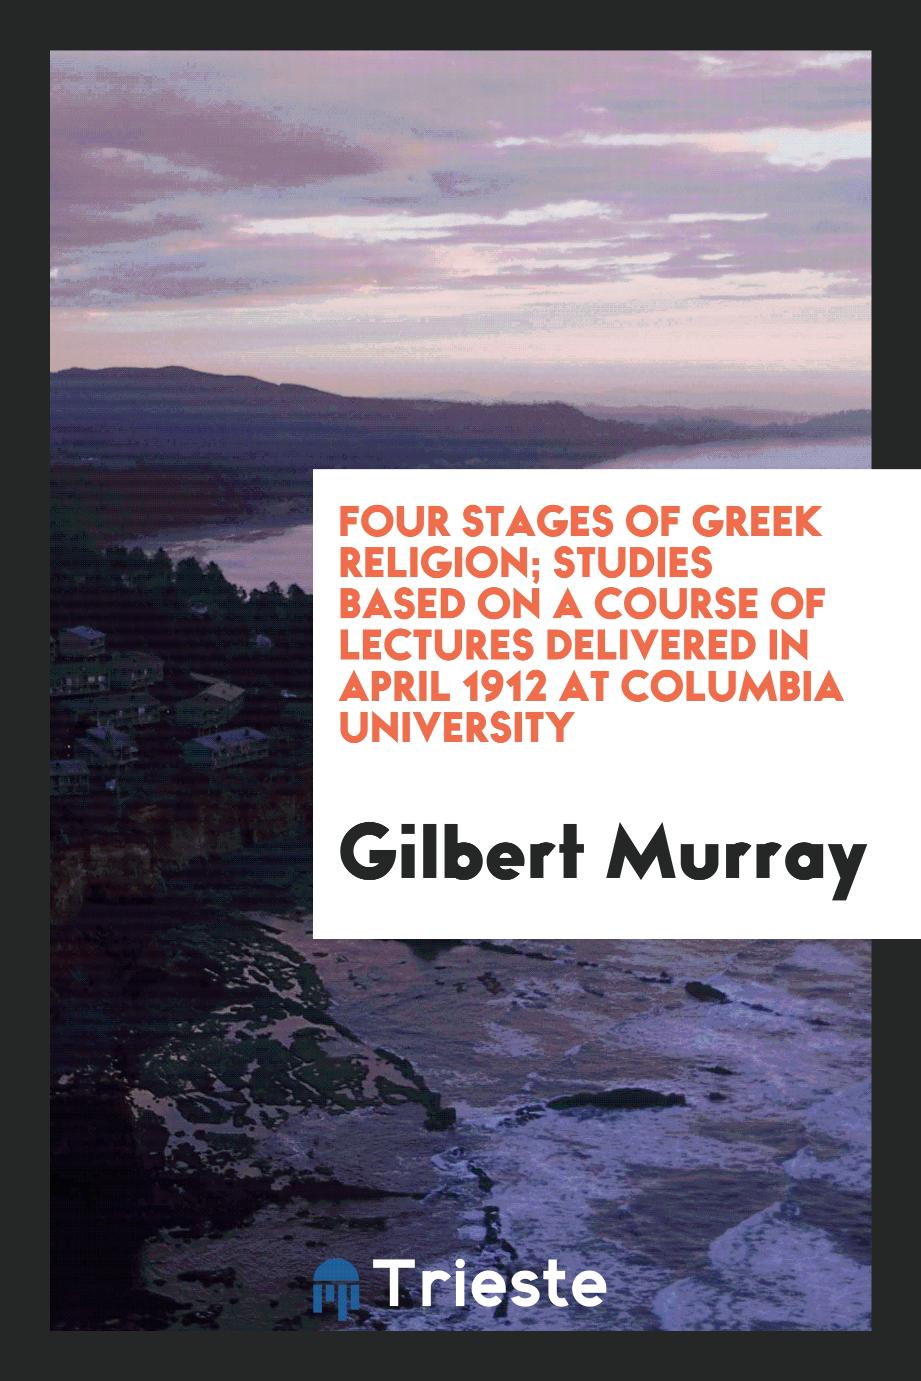 Four stages of Greek religion; studies based on a course of lectures delivered in April 1912 at Columbia University